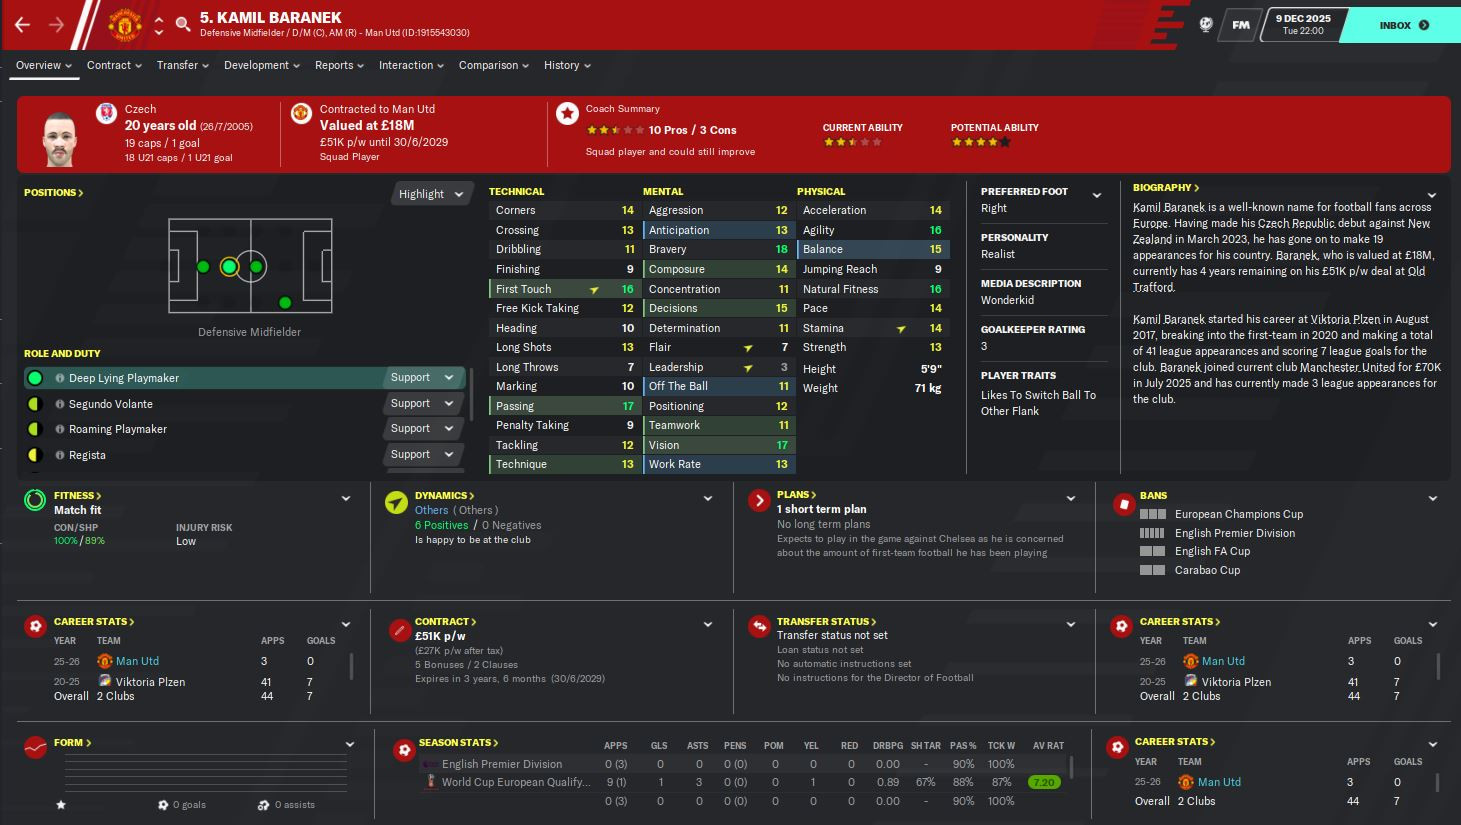 LATEST FM22 Contract Expiry Signings 2022: Mbappe and Pogba to be available  for FREE